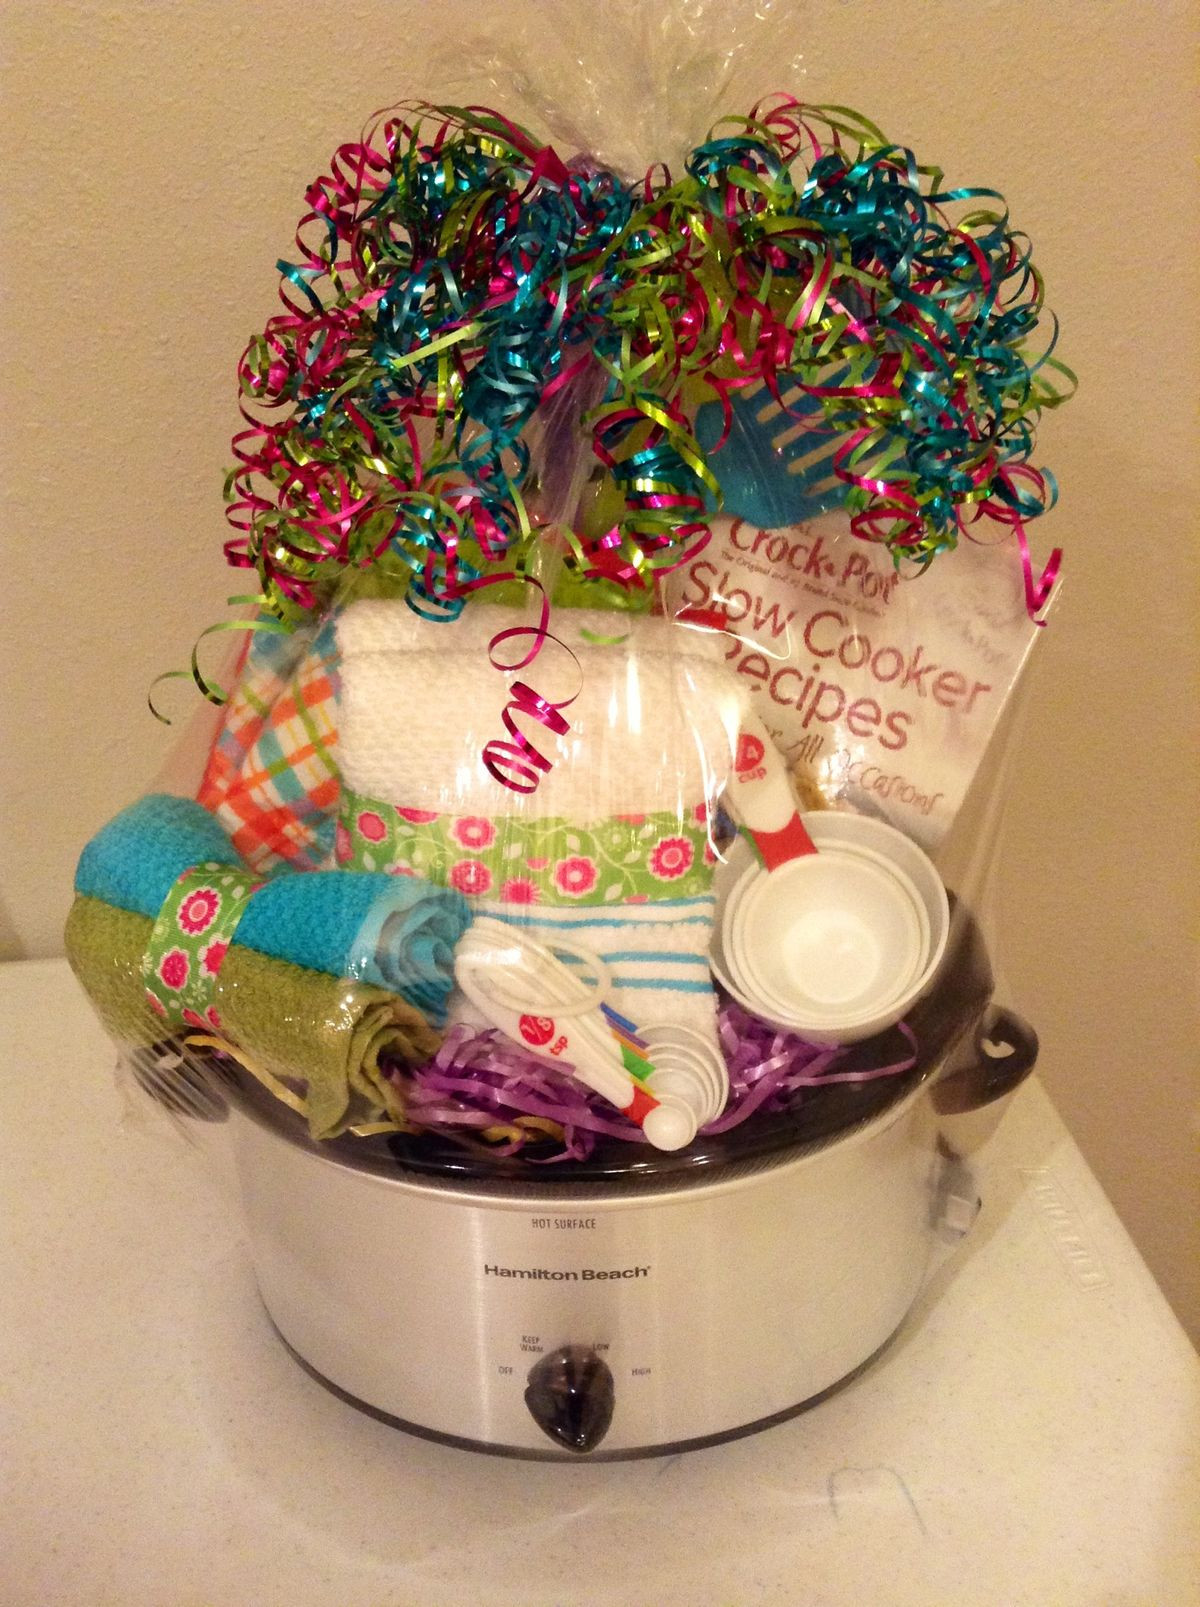 Ideas For Gift Baskets To Auction
 1000 images about Themed auction basket ideas on Pinterest